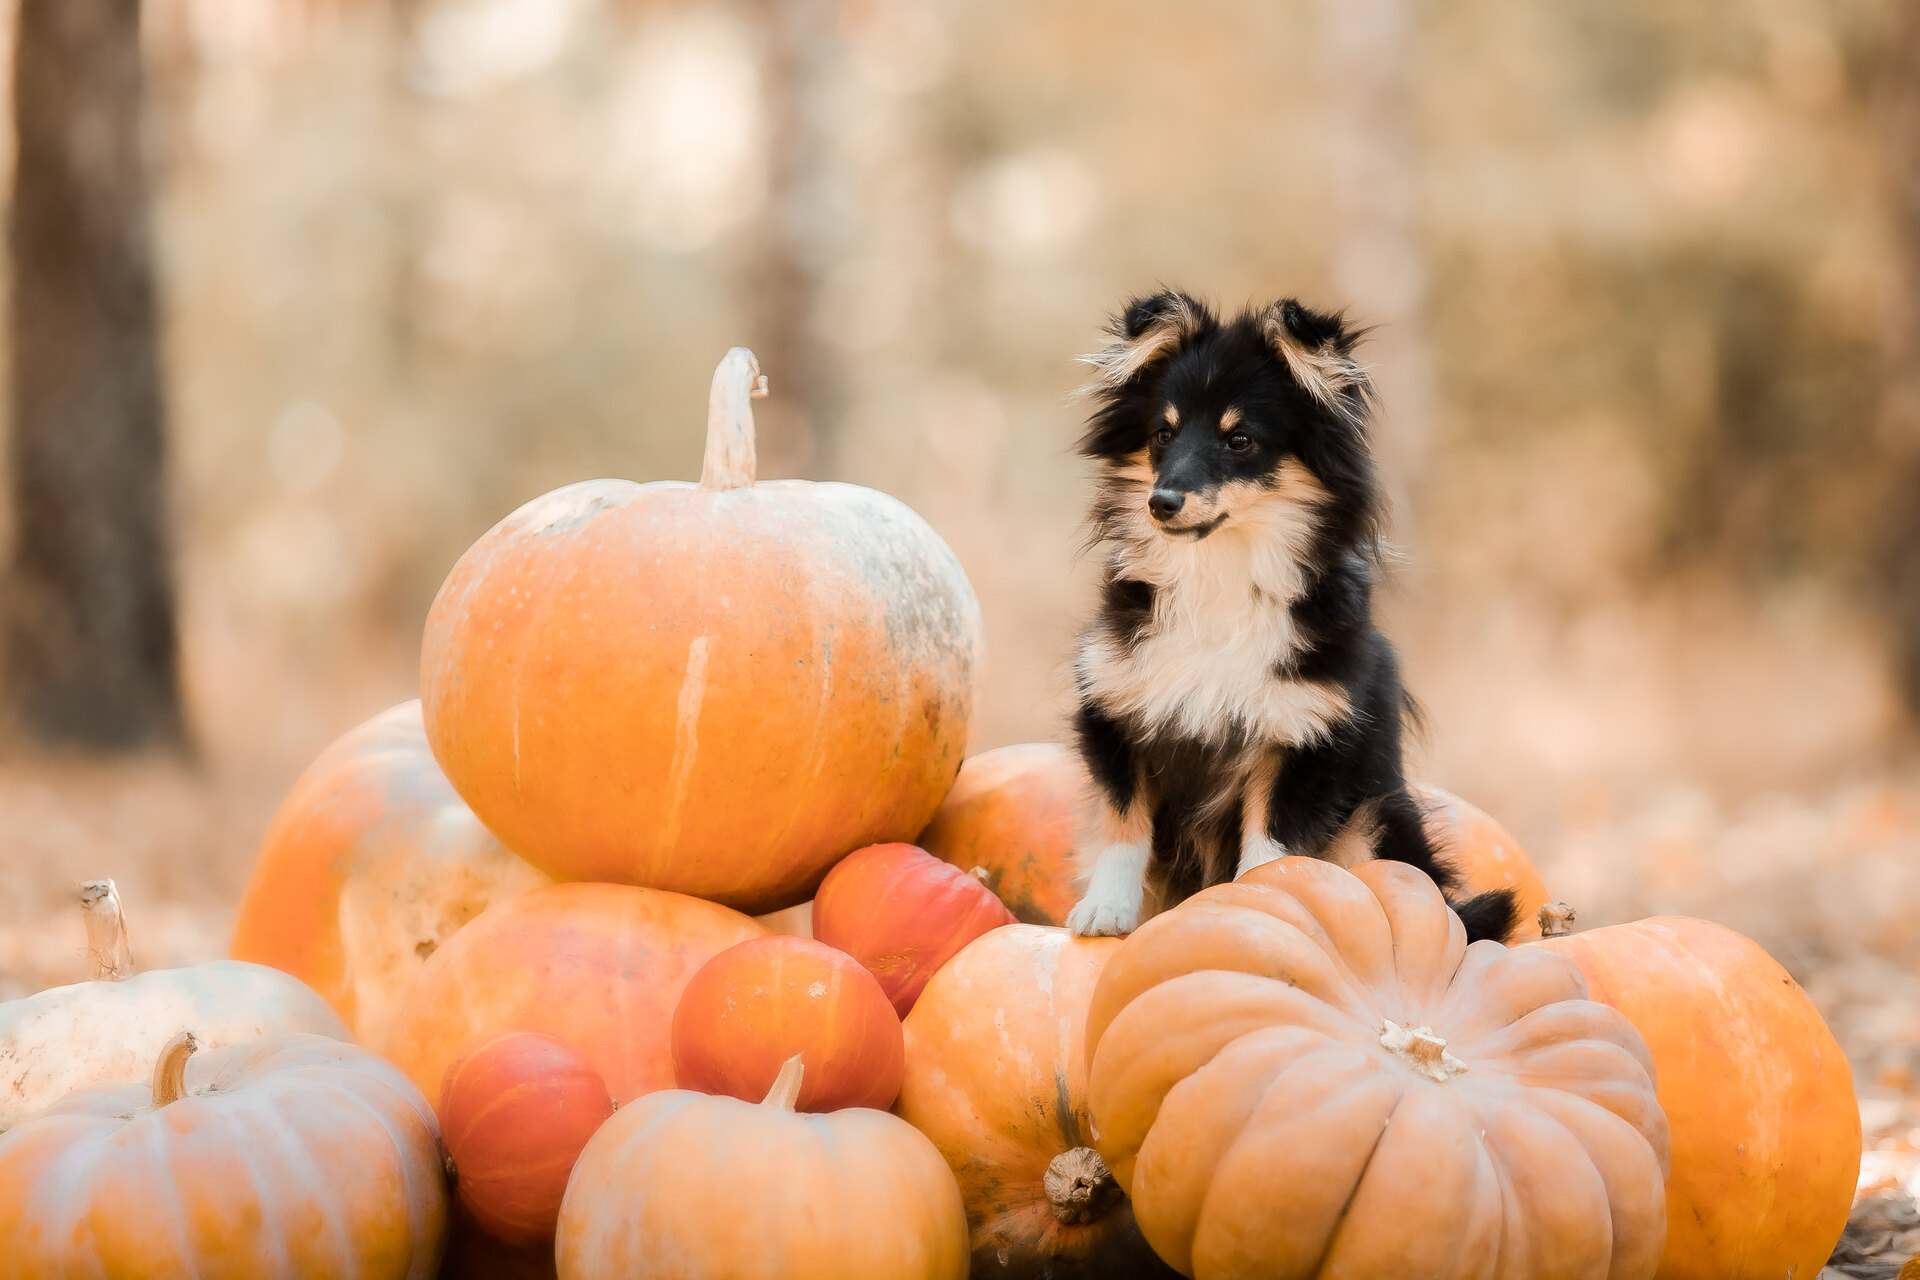 A dog sitting on a pile of pumpkins